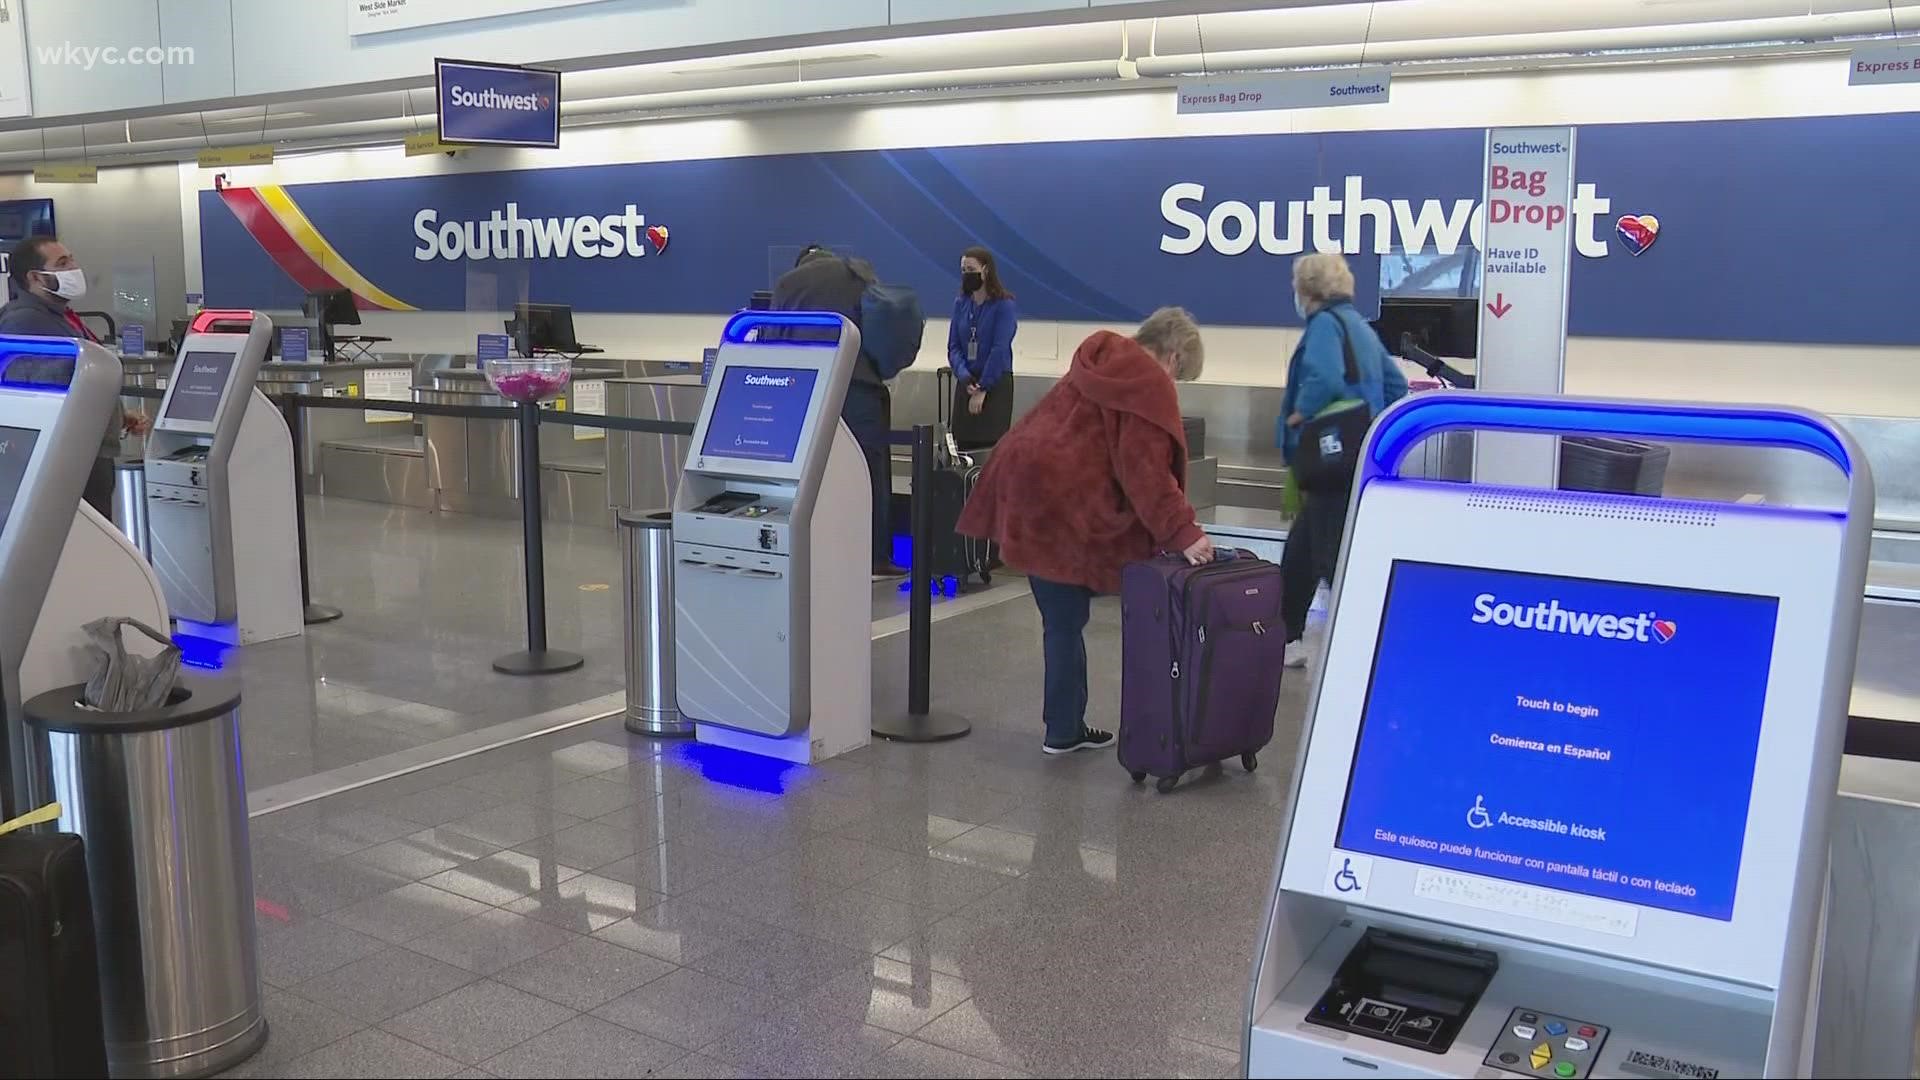 The holiday travel season is upon us. More people are expected to take to the sky in the weeks ahead. Brandon Simmons has more from Hopkins Airport.